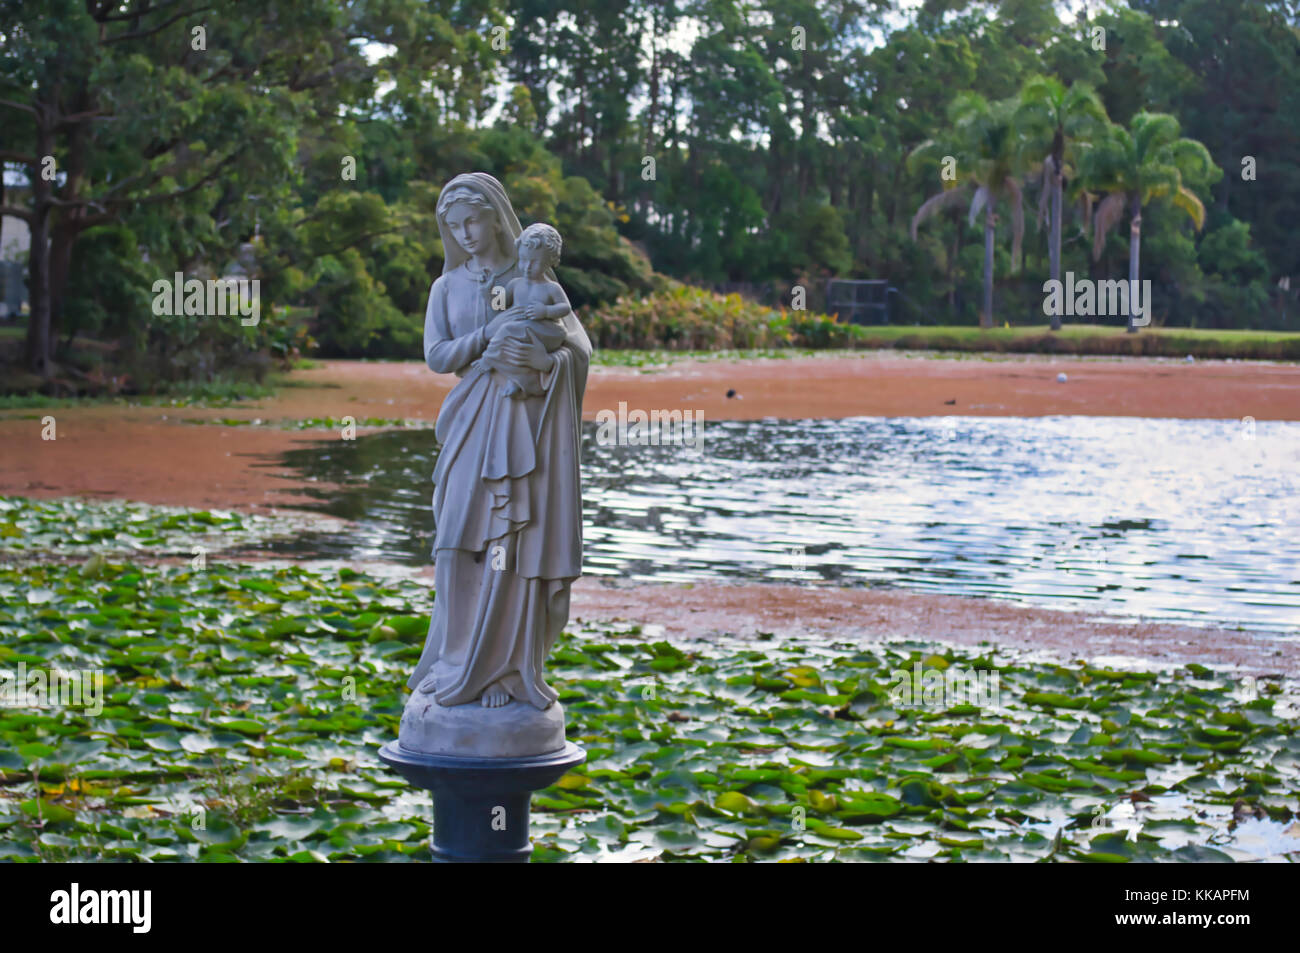 A statue of the Blessed Virgin Mary and the child Jesus in the man-made lagoon of a school compound. Stock Photo